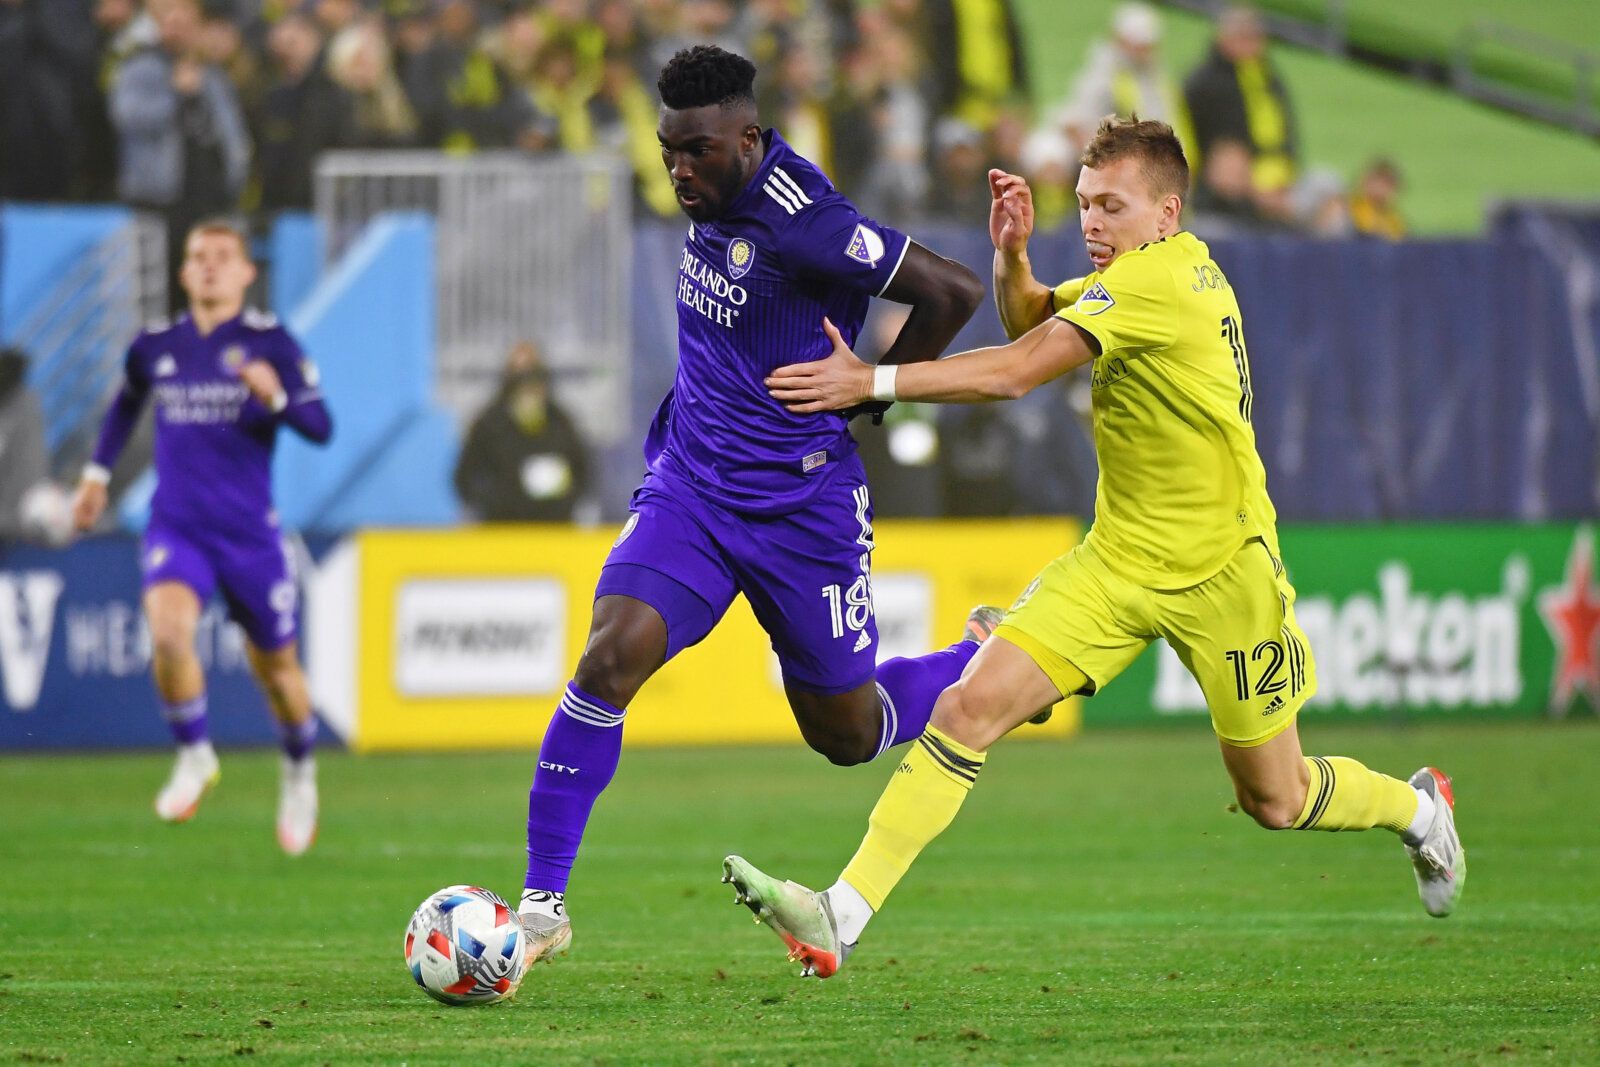 Nov 23, 2021; Nashville, TN, USA; Orlando City forward Daryl Dike (18) dribbles the ball past Nashville SC defender Alistair Johnston (12) during the first half of a round one MLS Playoff game at Nissan Stadium. Mandatory Credit: Christopher Hanewinckel-USA TODAY Sports